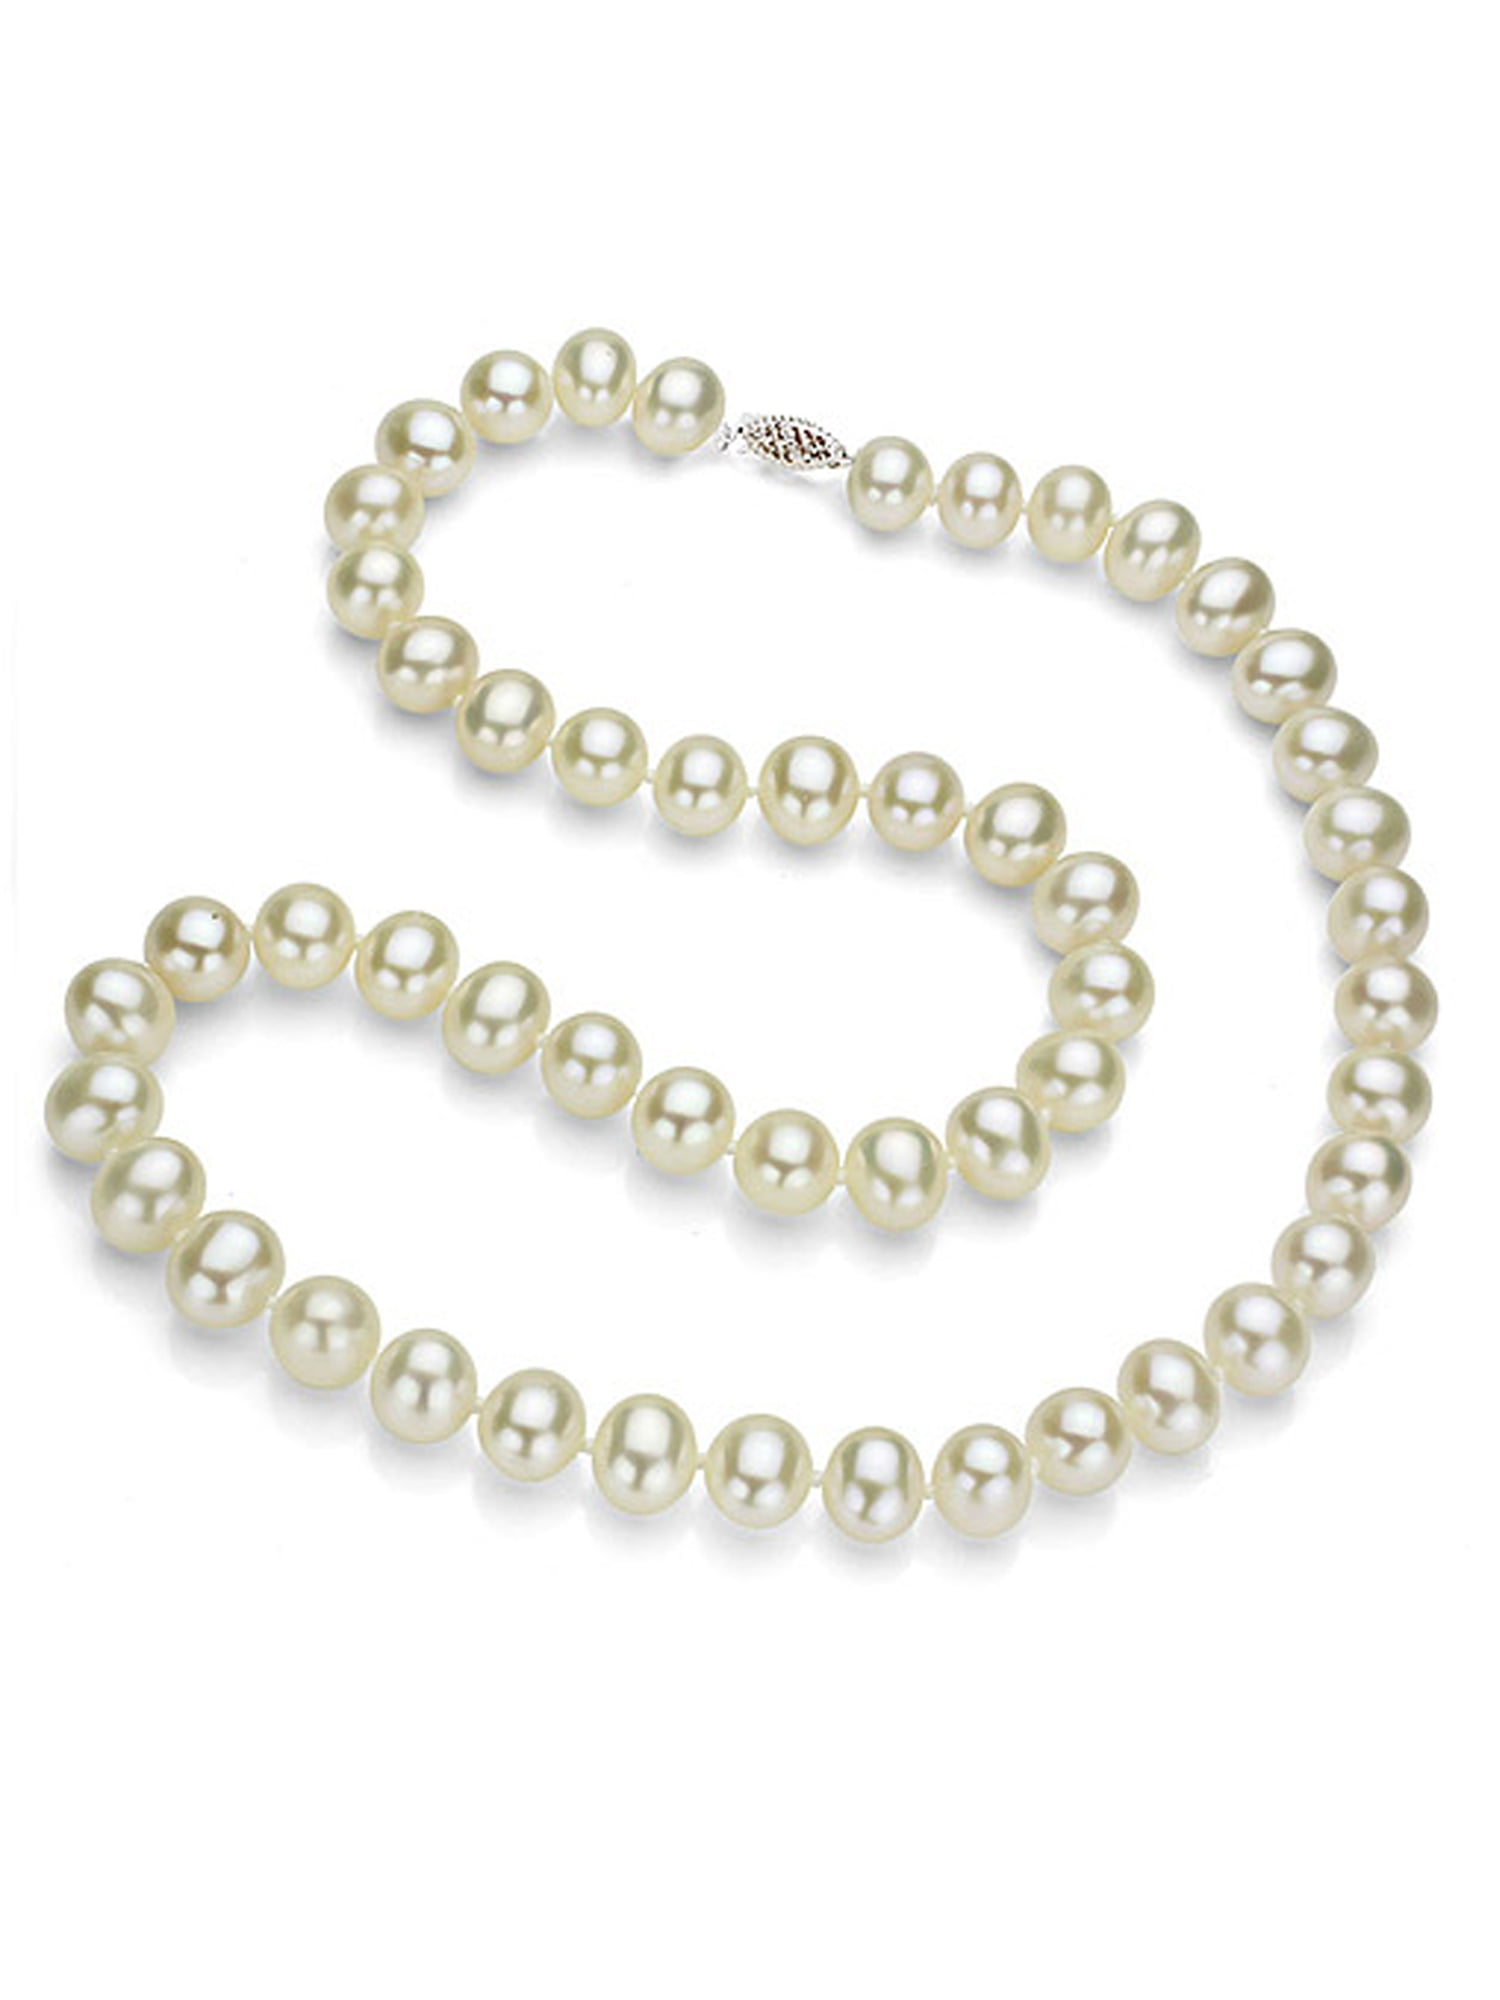 Pure white real freshwater pearl 18 inch necklace with silver clasp gift boxed